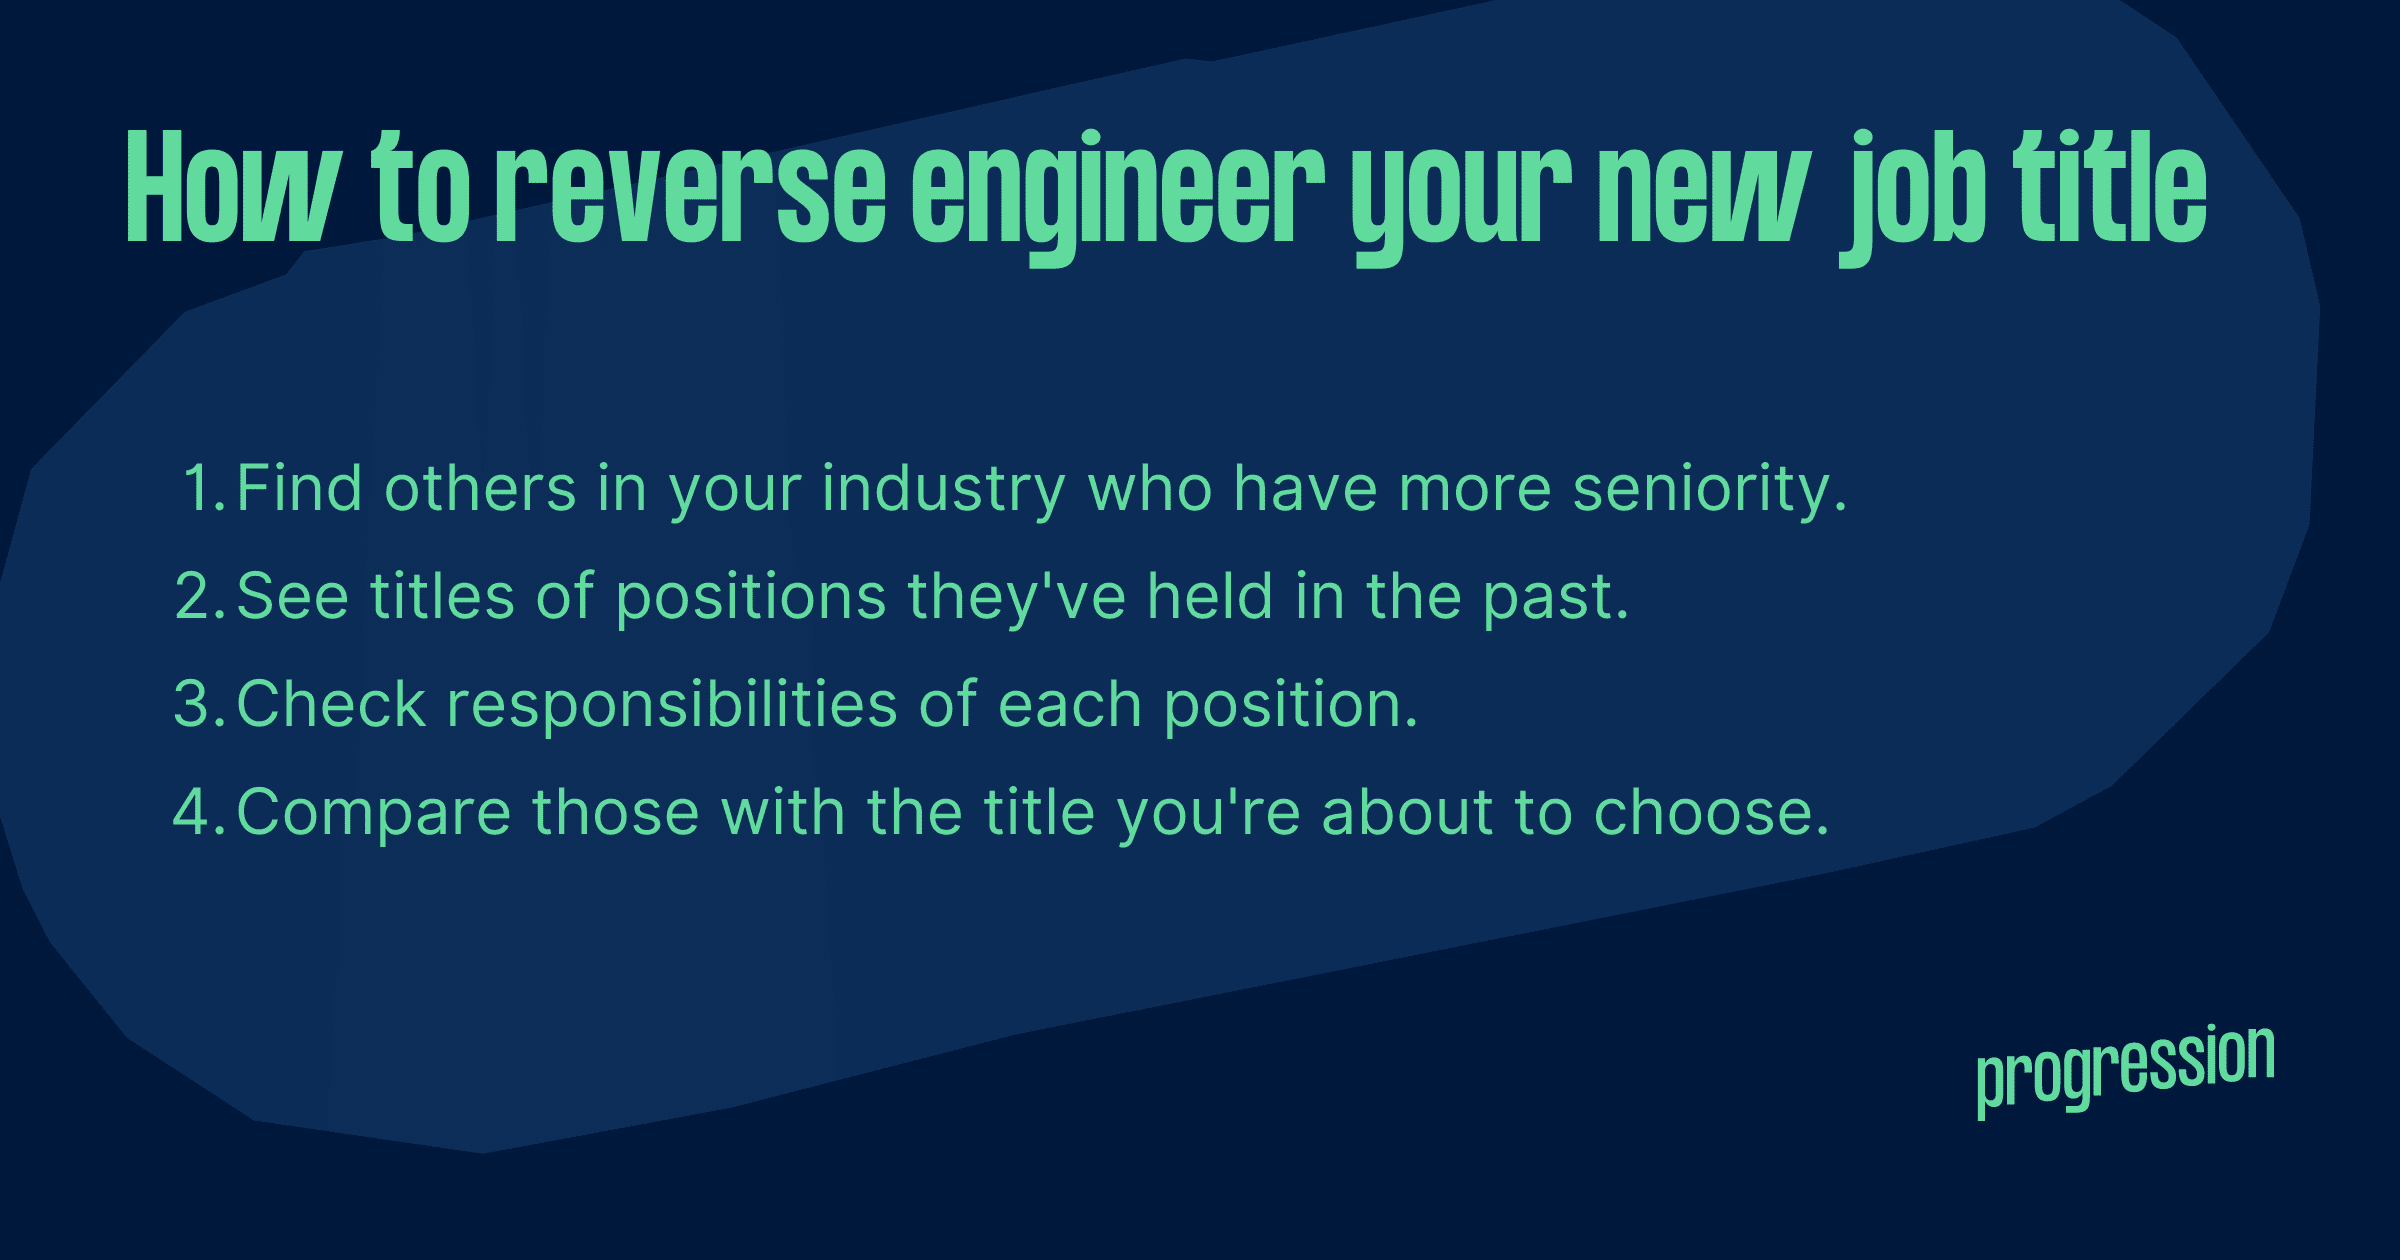 Graphic showing how to reverse engineer your job title